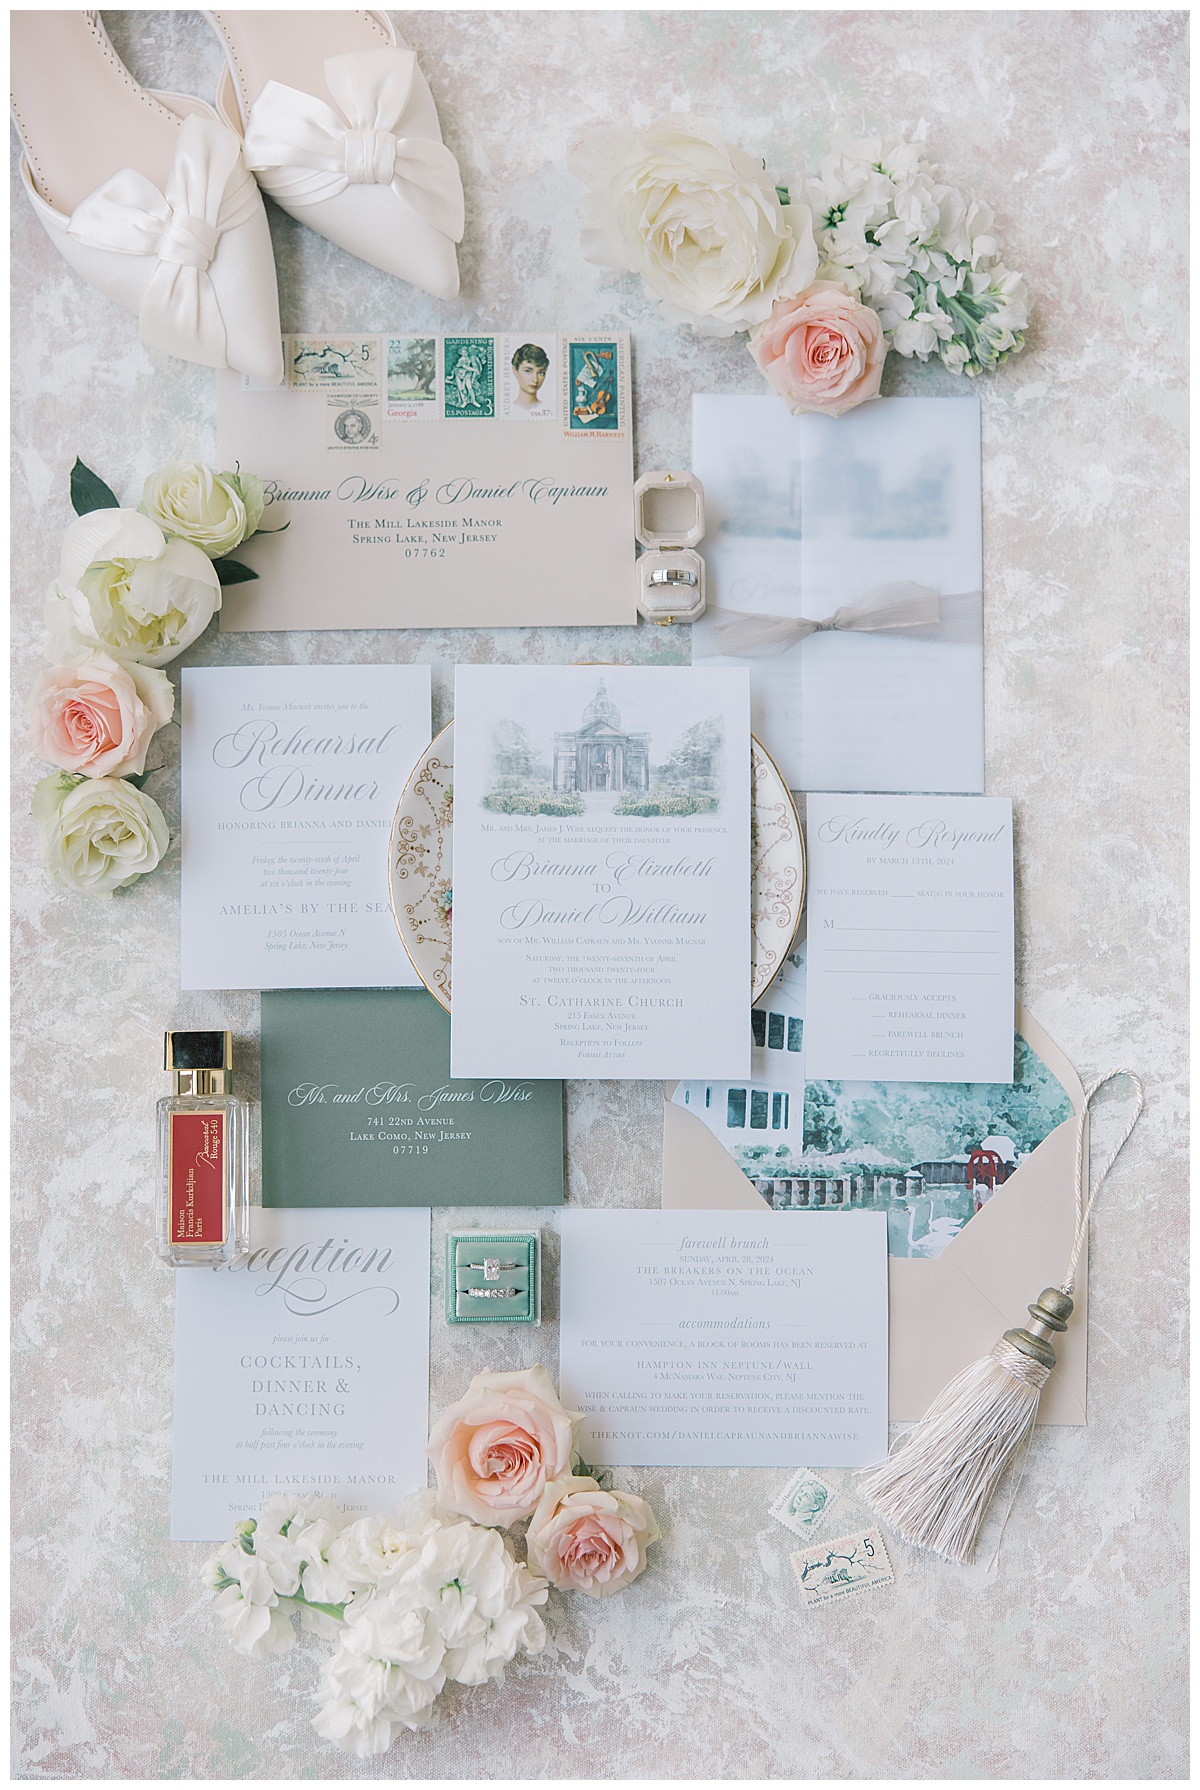 White + green invitation by suitescape design with The Mill featured on envelope. 